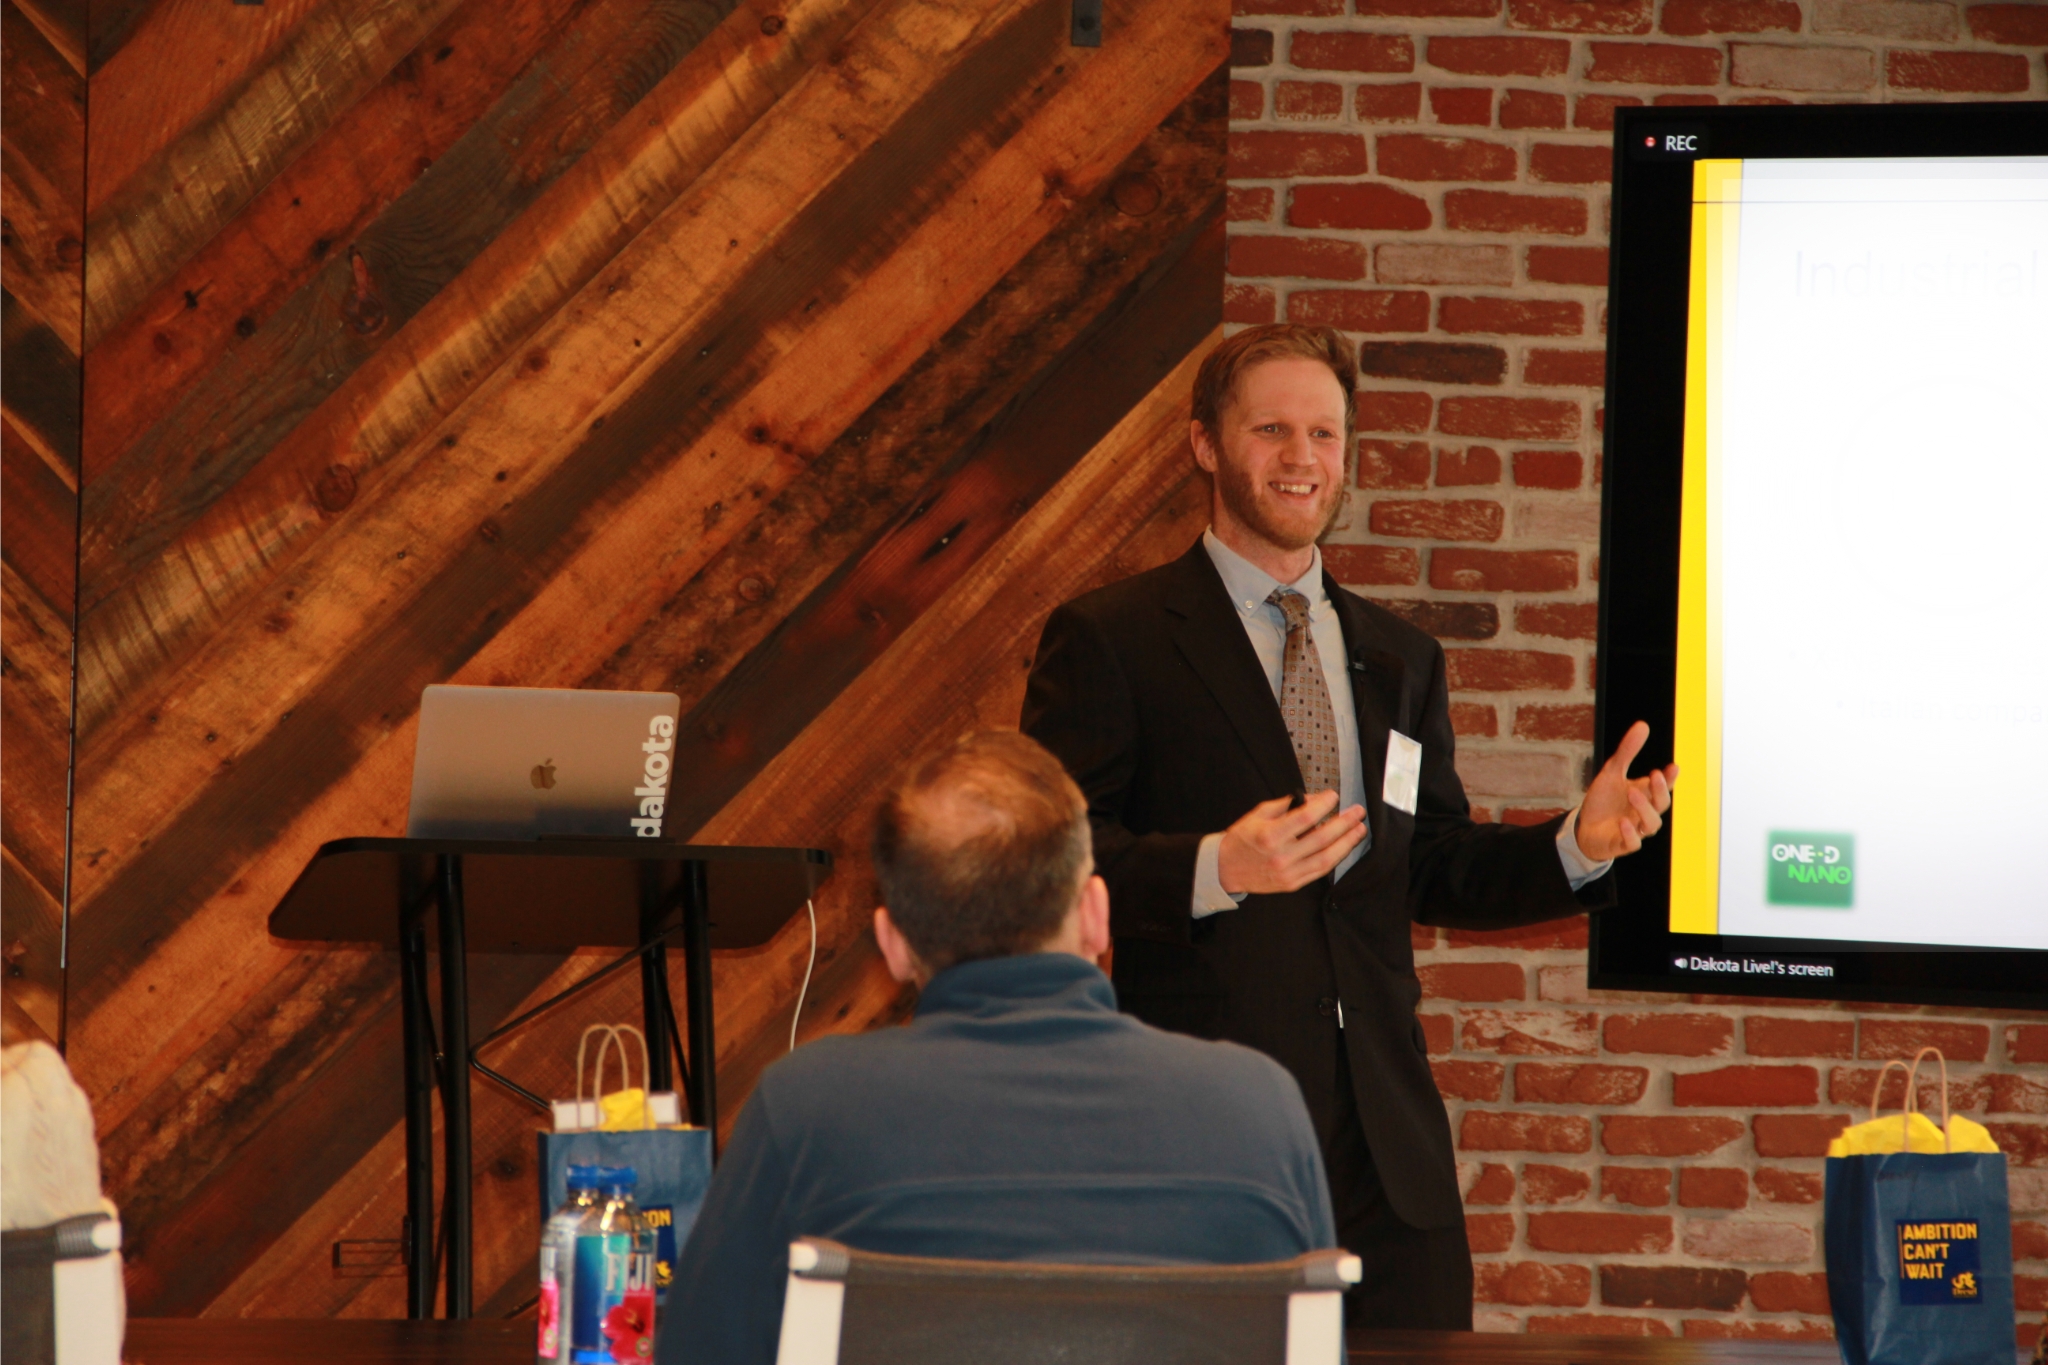 Drexel University Innovation Fund recently hosted its first in-person Pitch Day